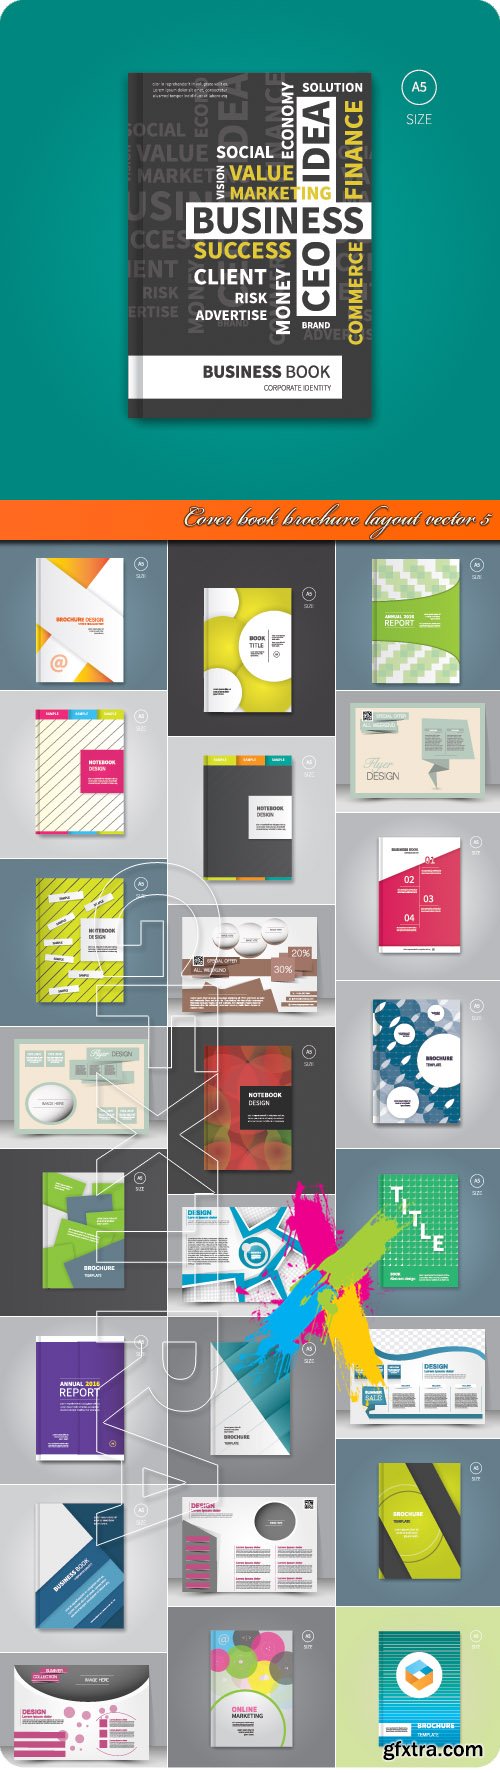 Cover book brochure layout vector 5